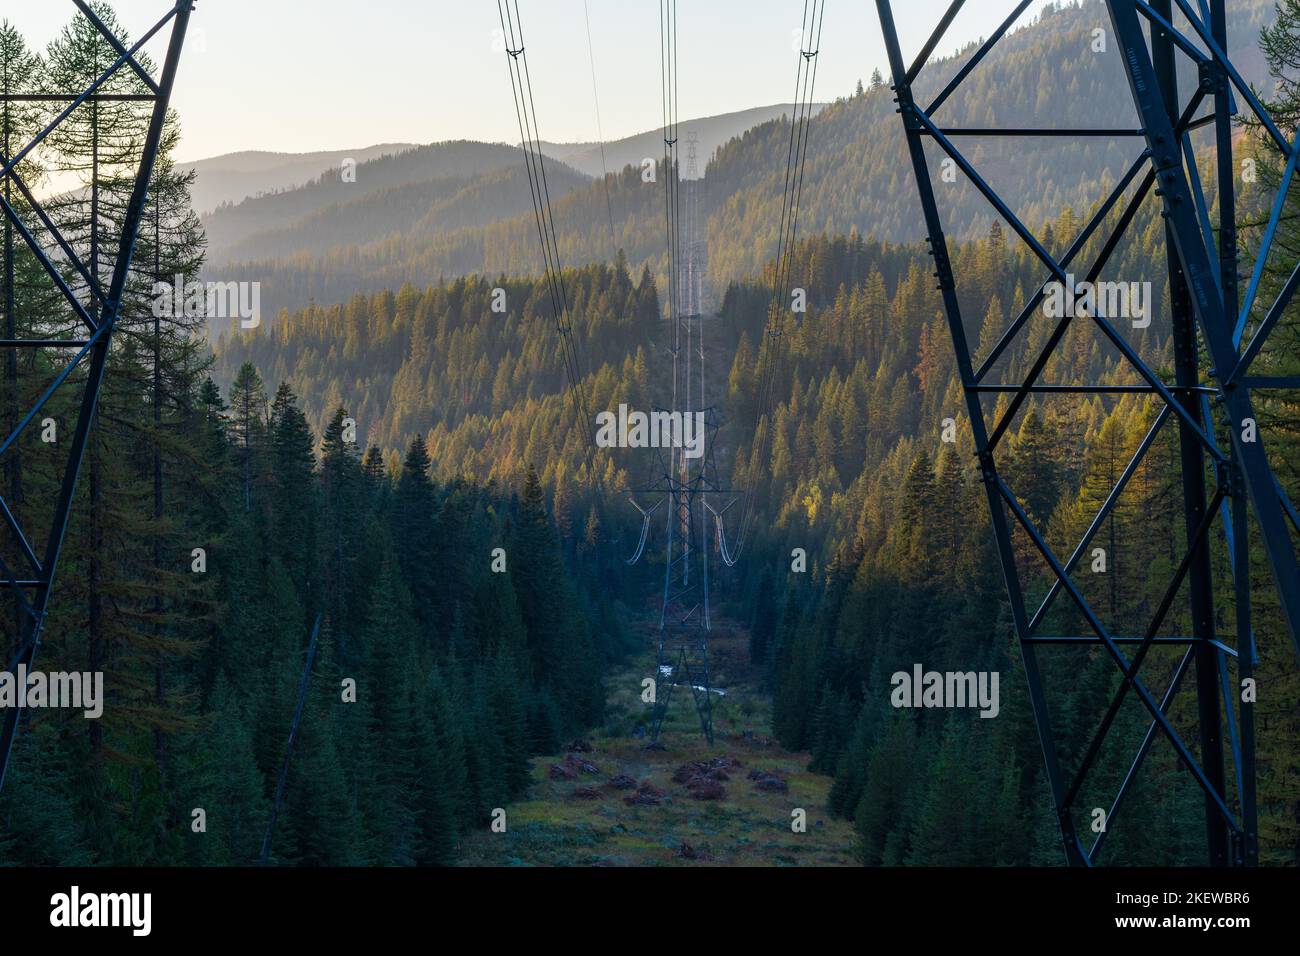 High Voltage Power Lines cross a mountain top and valley. Stock Photo